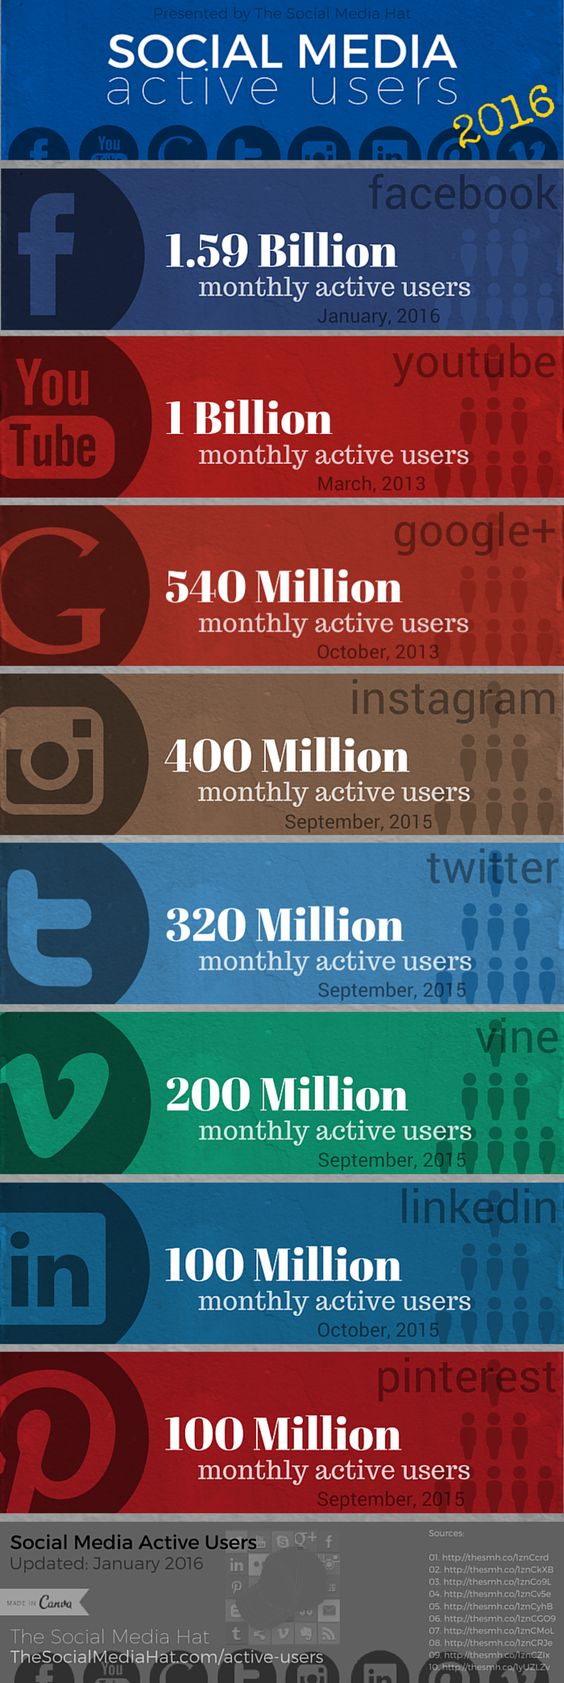 Active User Counts for All Major Social Networks by The Social Media Hat